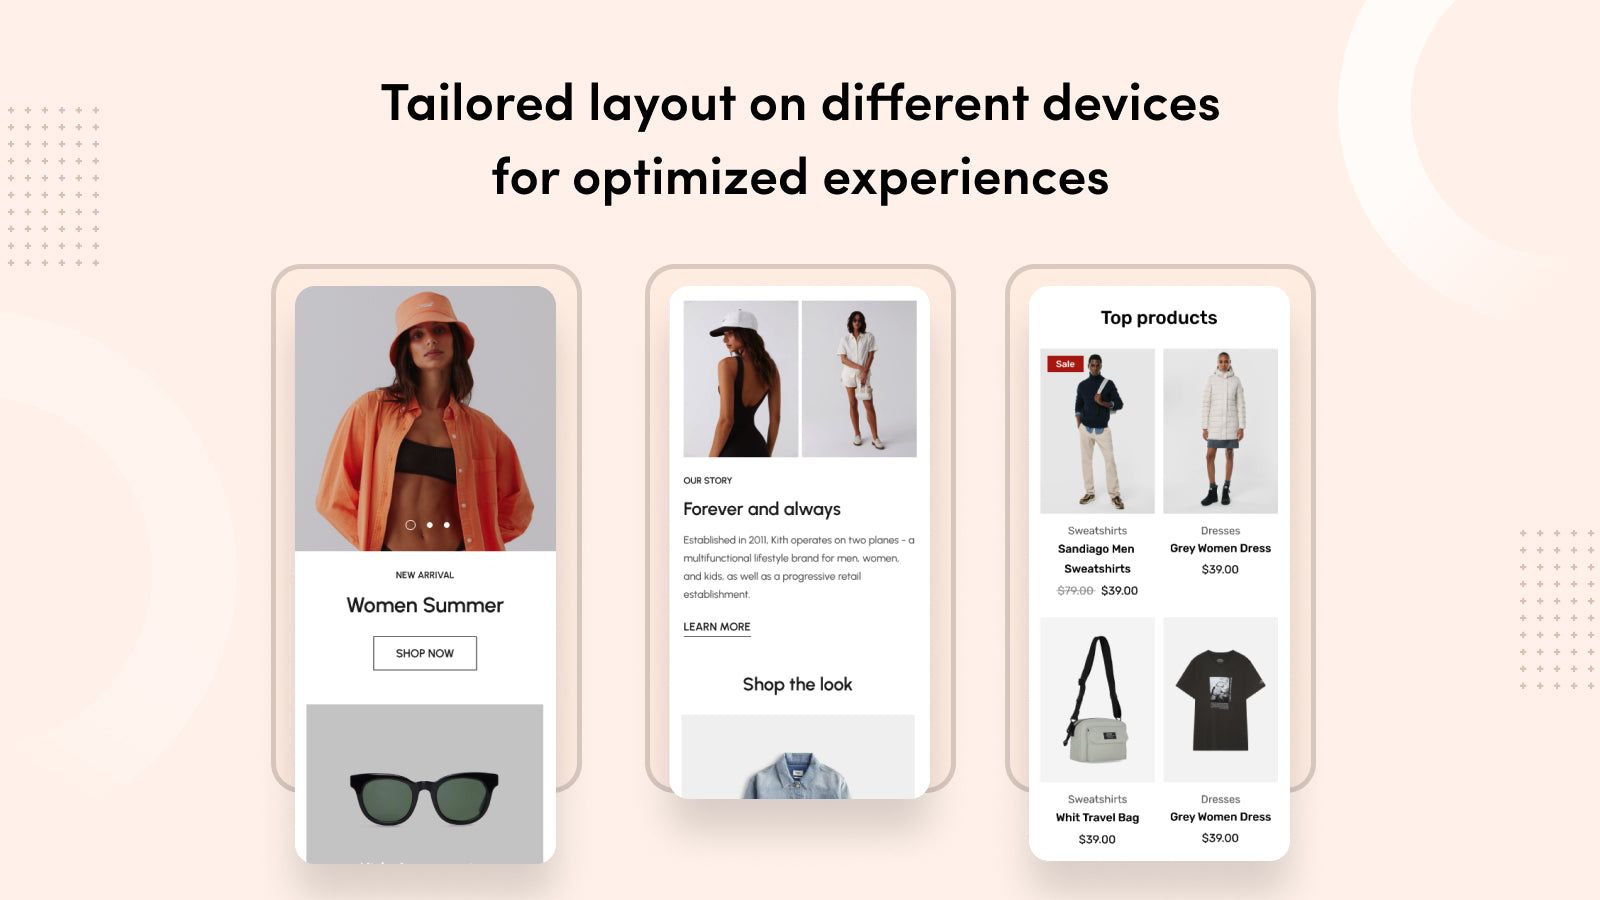 Tailored layout on different devices for optimized experiences